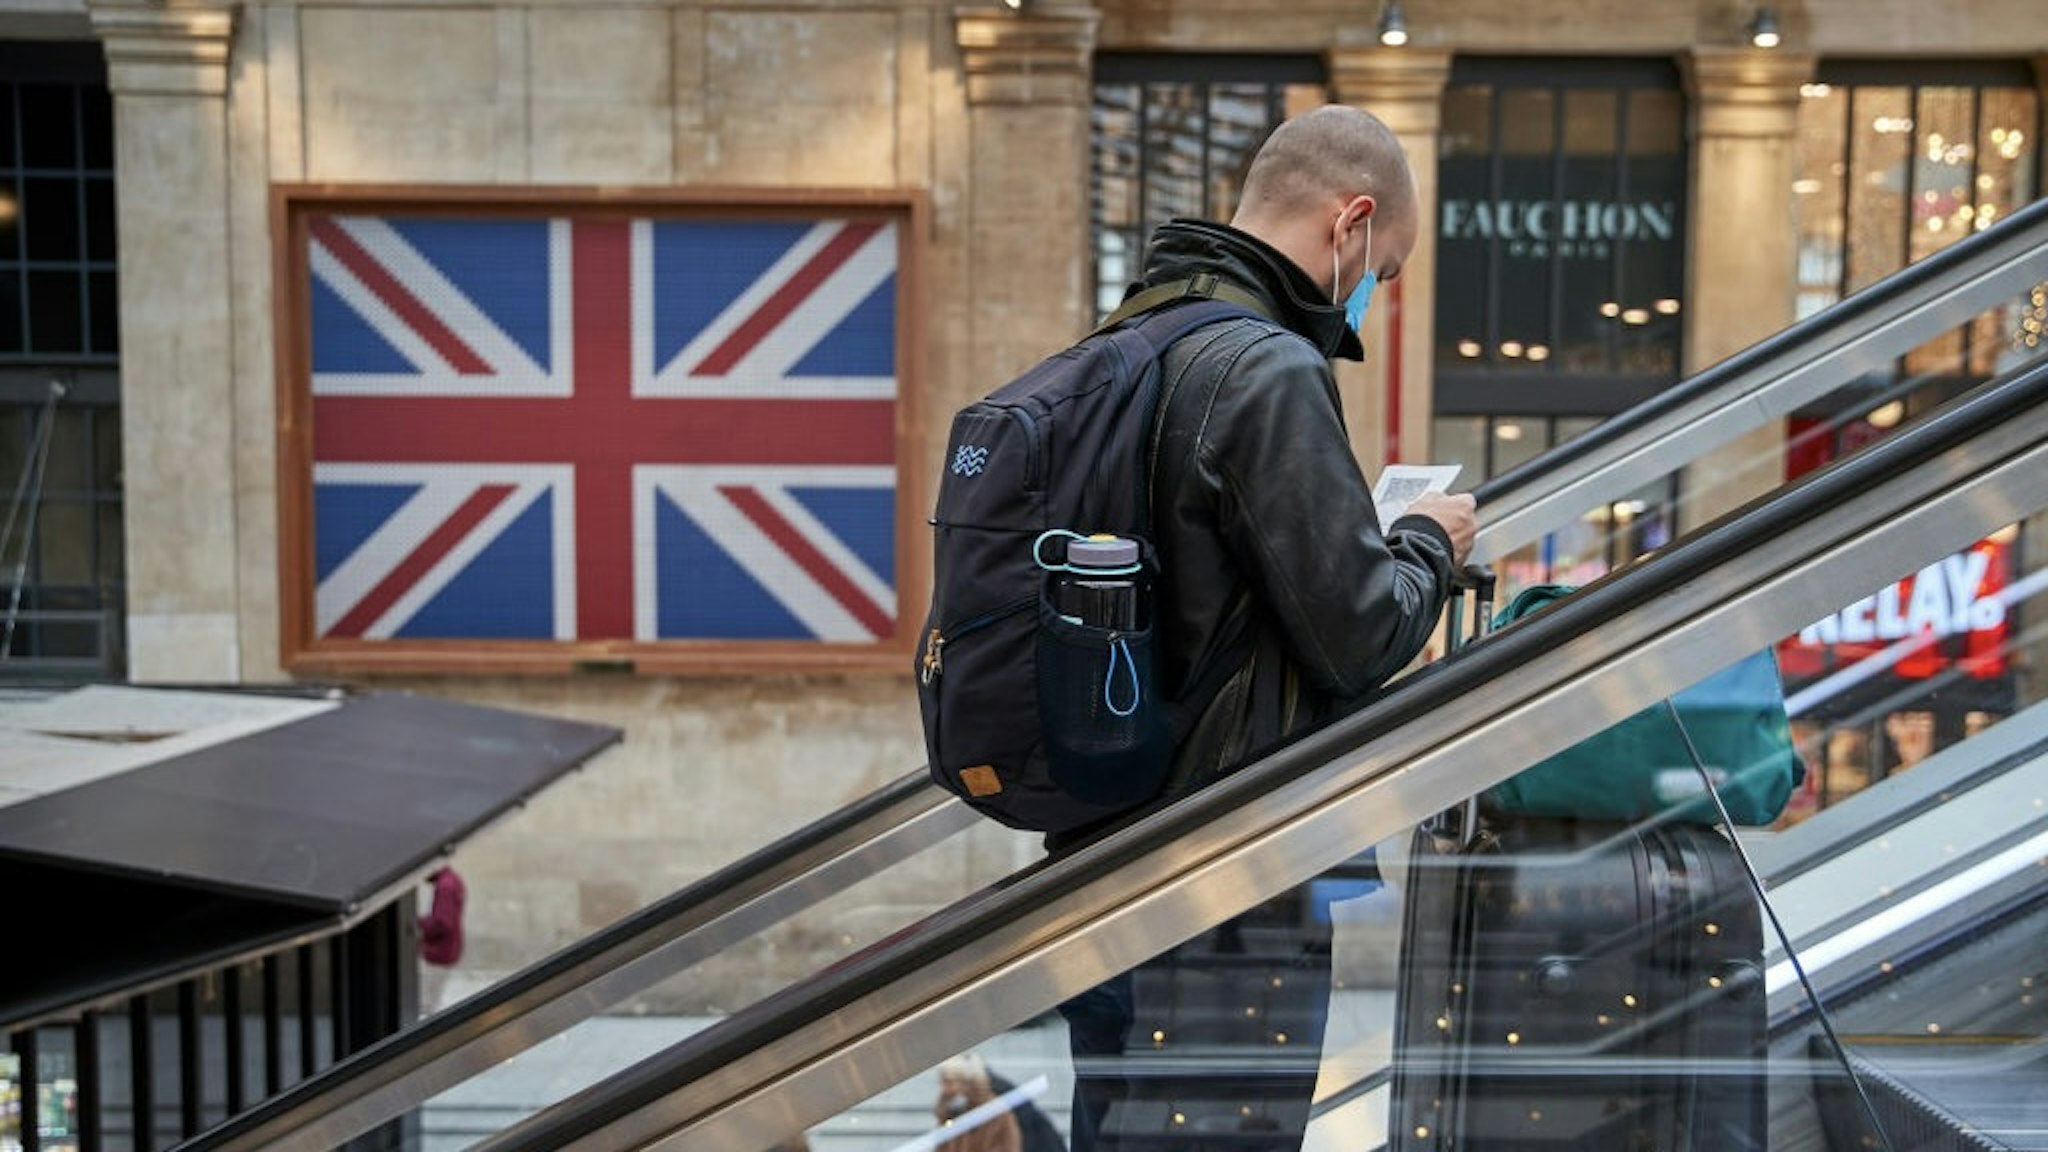 France Tightens Travel Restrictions With UK To Curb Covid-19 Omicron Variant Infections PARIS, FRANCE - DECEMBER 16: A passenger takes an escalator past a giant Union Flag to the Eurostar terminal at Paris Gare du Nord station as new travel restrictions between the UK and France are announced in response to the Omicron variant on December 16, 2021 in Paris, France. The French government announced that all travel leaving or returning from the United Kingdom will be restricted as of December 18th due to the rising cases of the Omicron variant. (Photo by Kiran Ridley/Getty Images) Kiran Ridley / Contributor